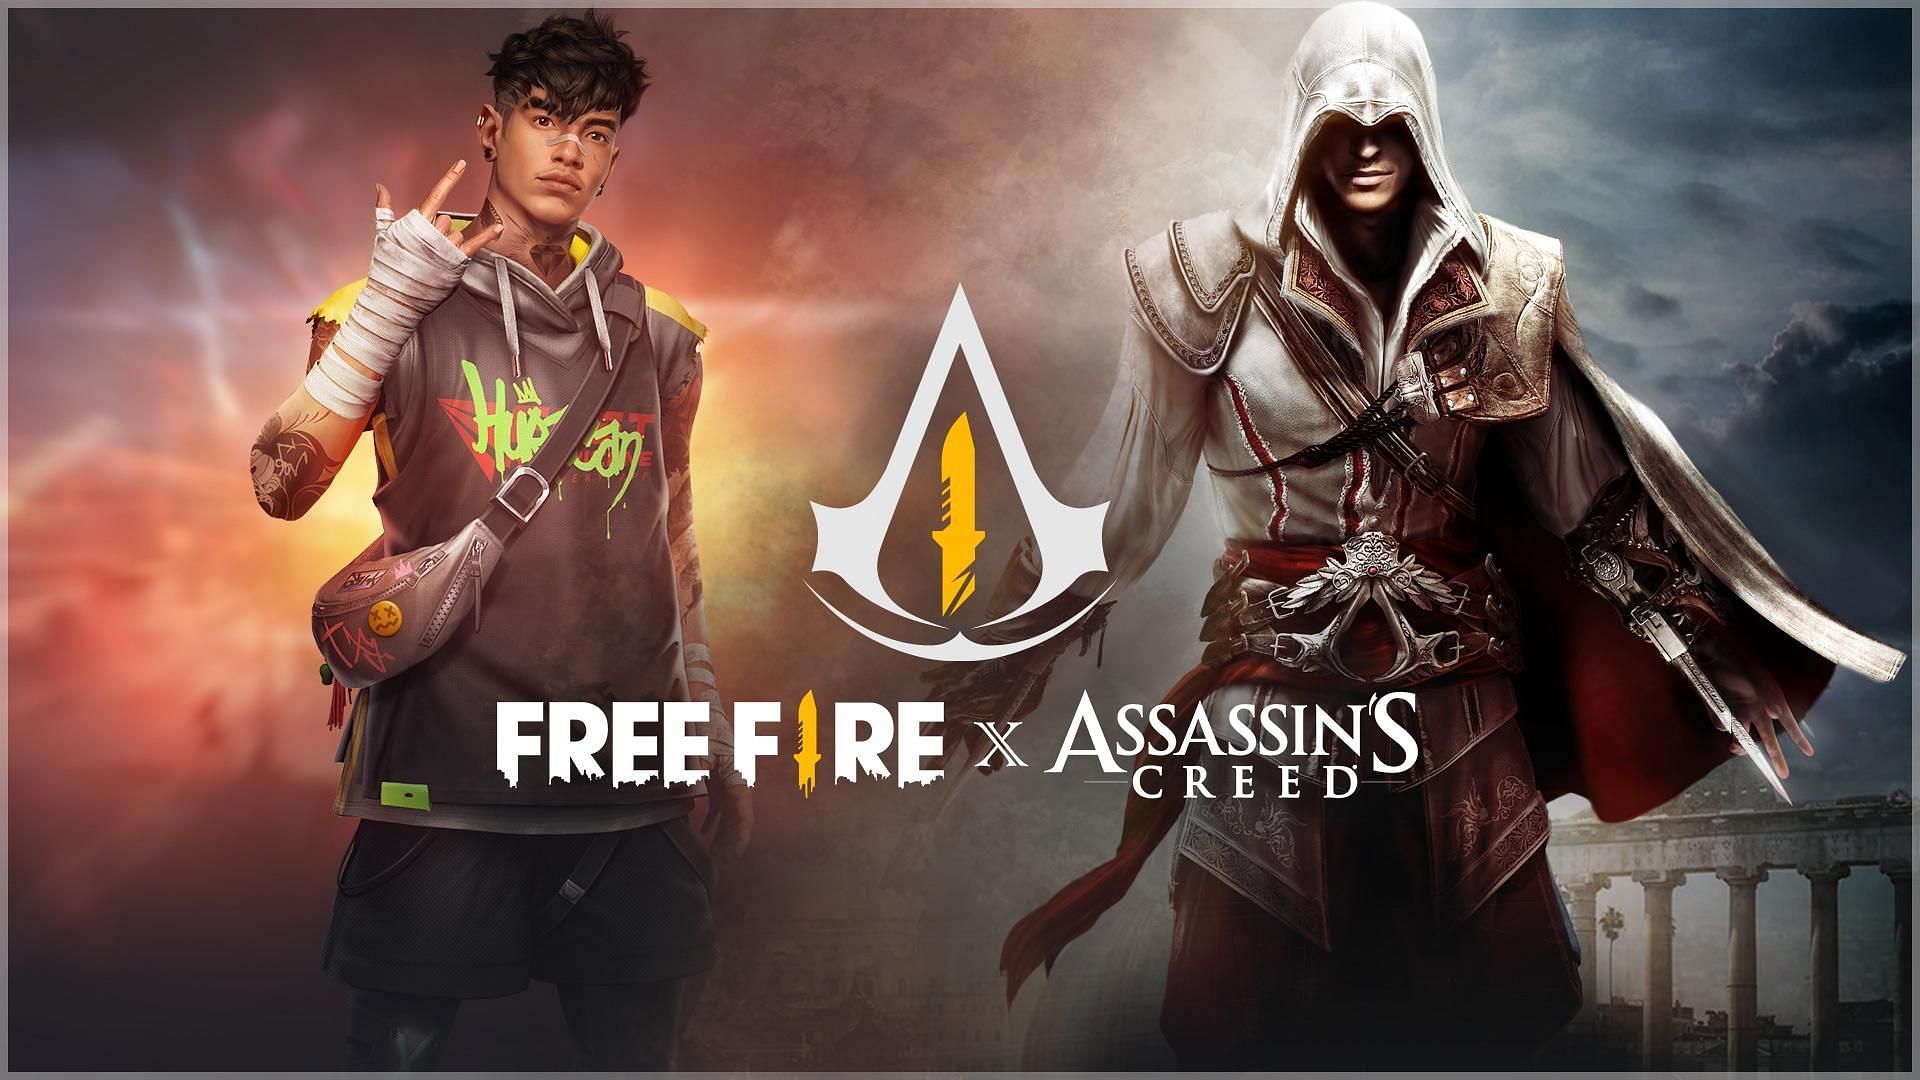 Garena Free Fire&rsquo;s latest crossover brings Assassin&rsquo;s Creed content into the world of Free Fire